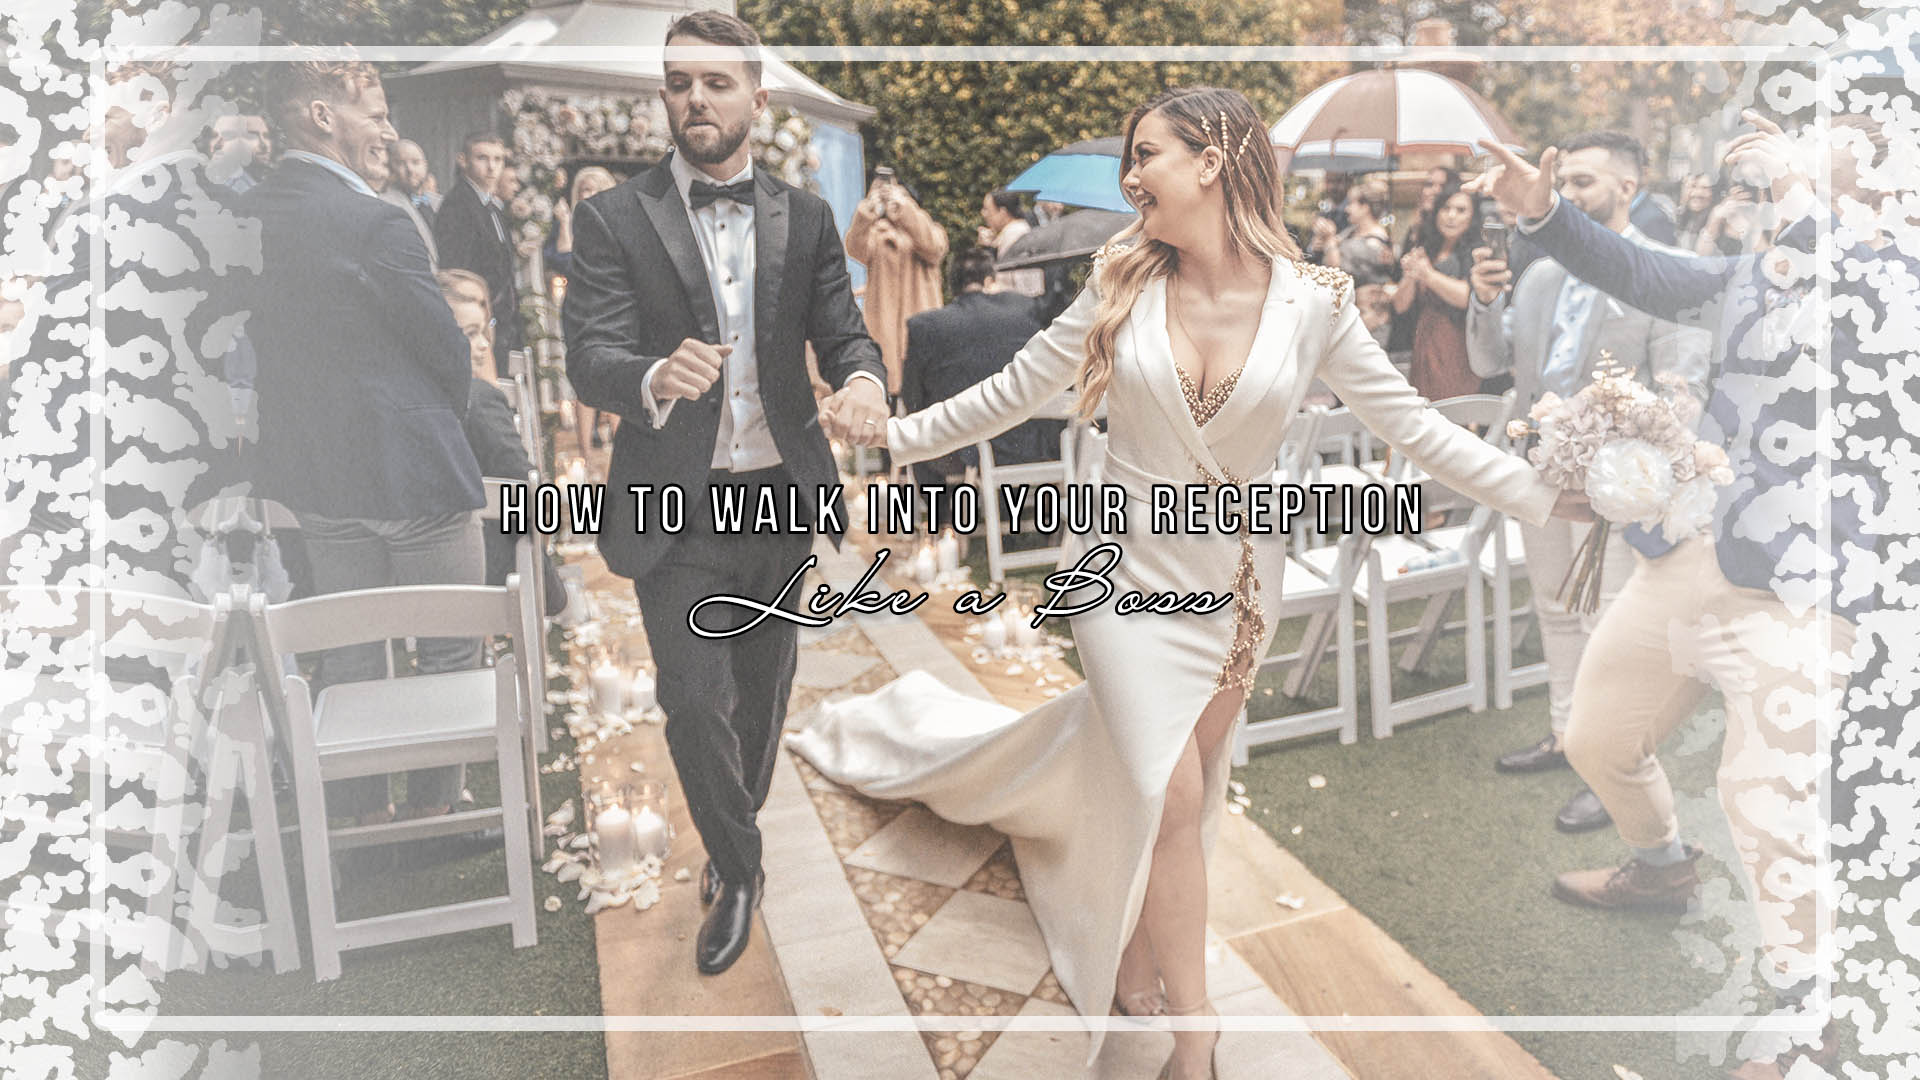 How to Walk Into Your Reception Like a Boss